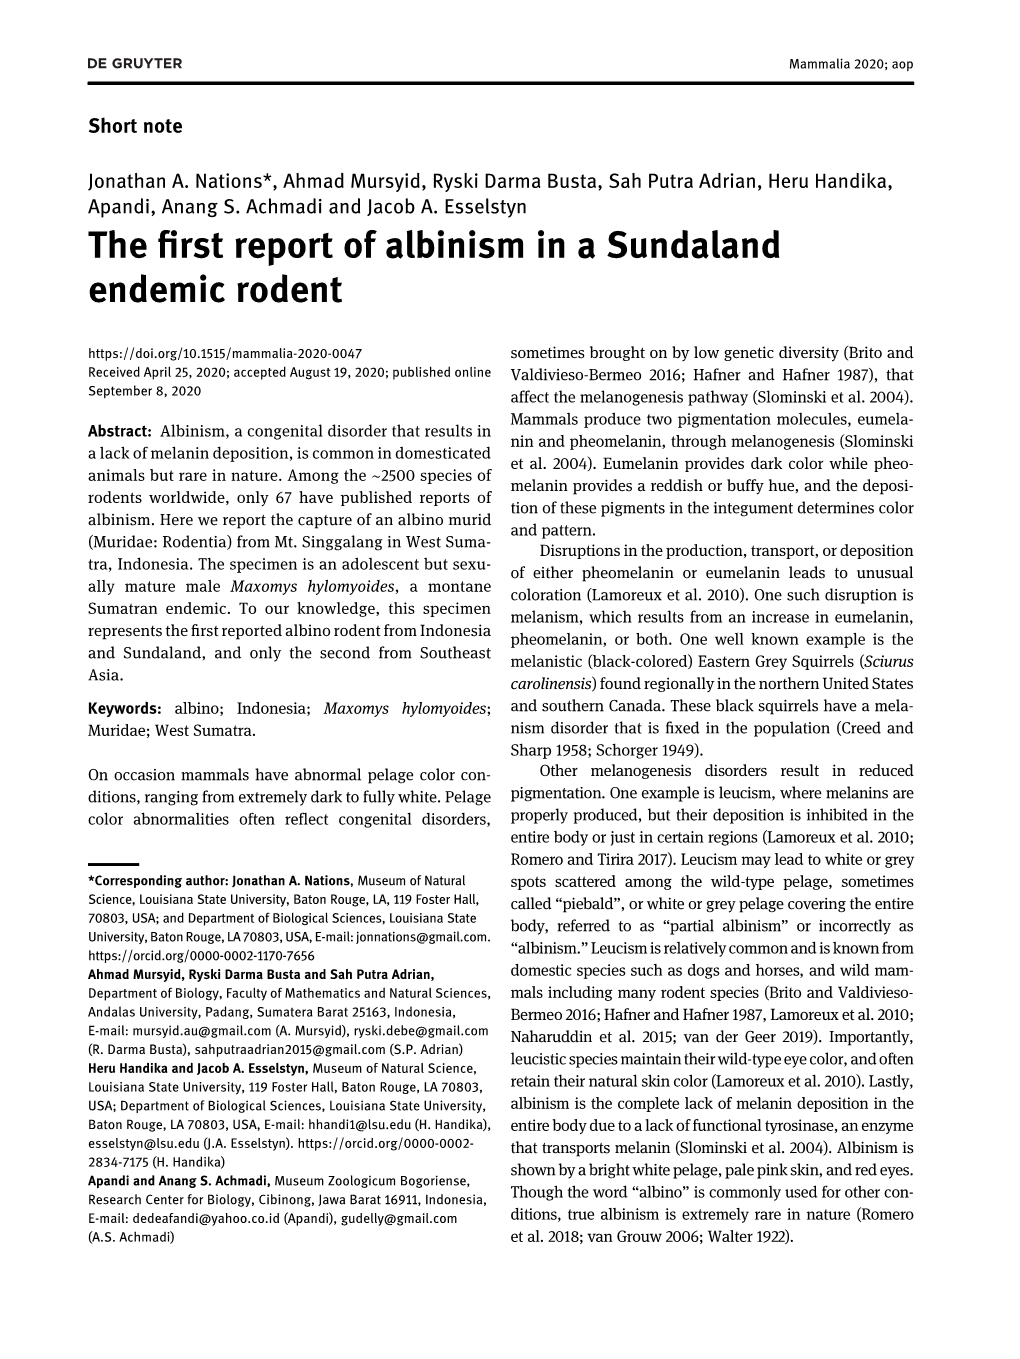 The First Report of Albinism in a Sundaland Endemic Rodent